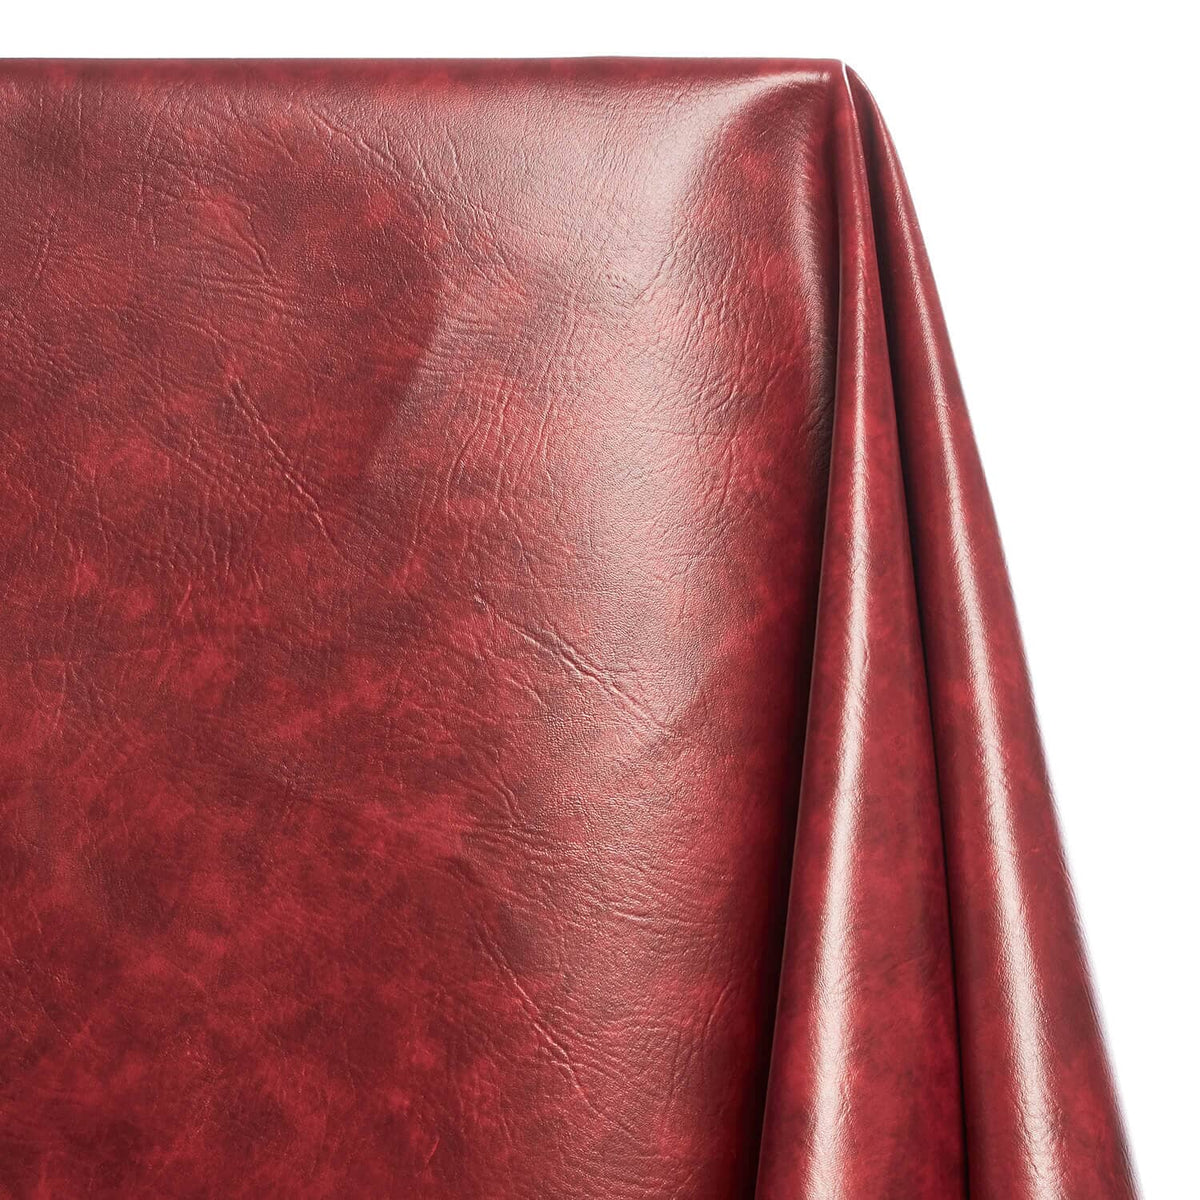 Ottertex Vinyl Fabric Faux Leather Pleather Upholstery 54 Wide by The Yard (Red)